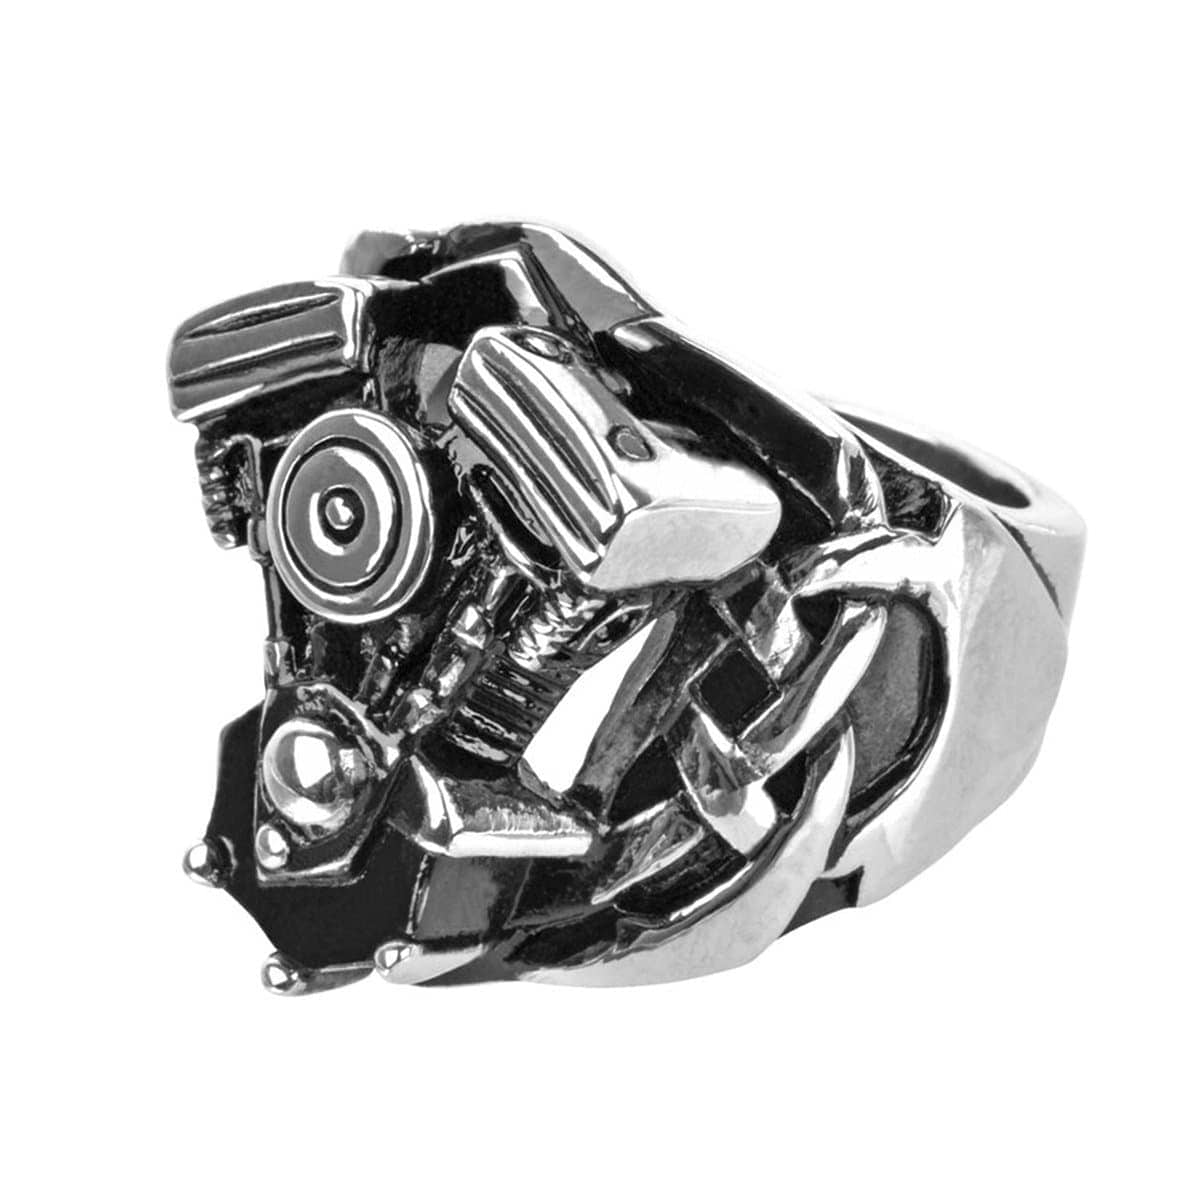 INOX JEWELRY Rings Antiqued Silver Tone Stainless Steel Motorcycle Engine Ring